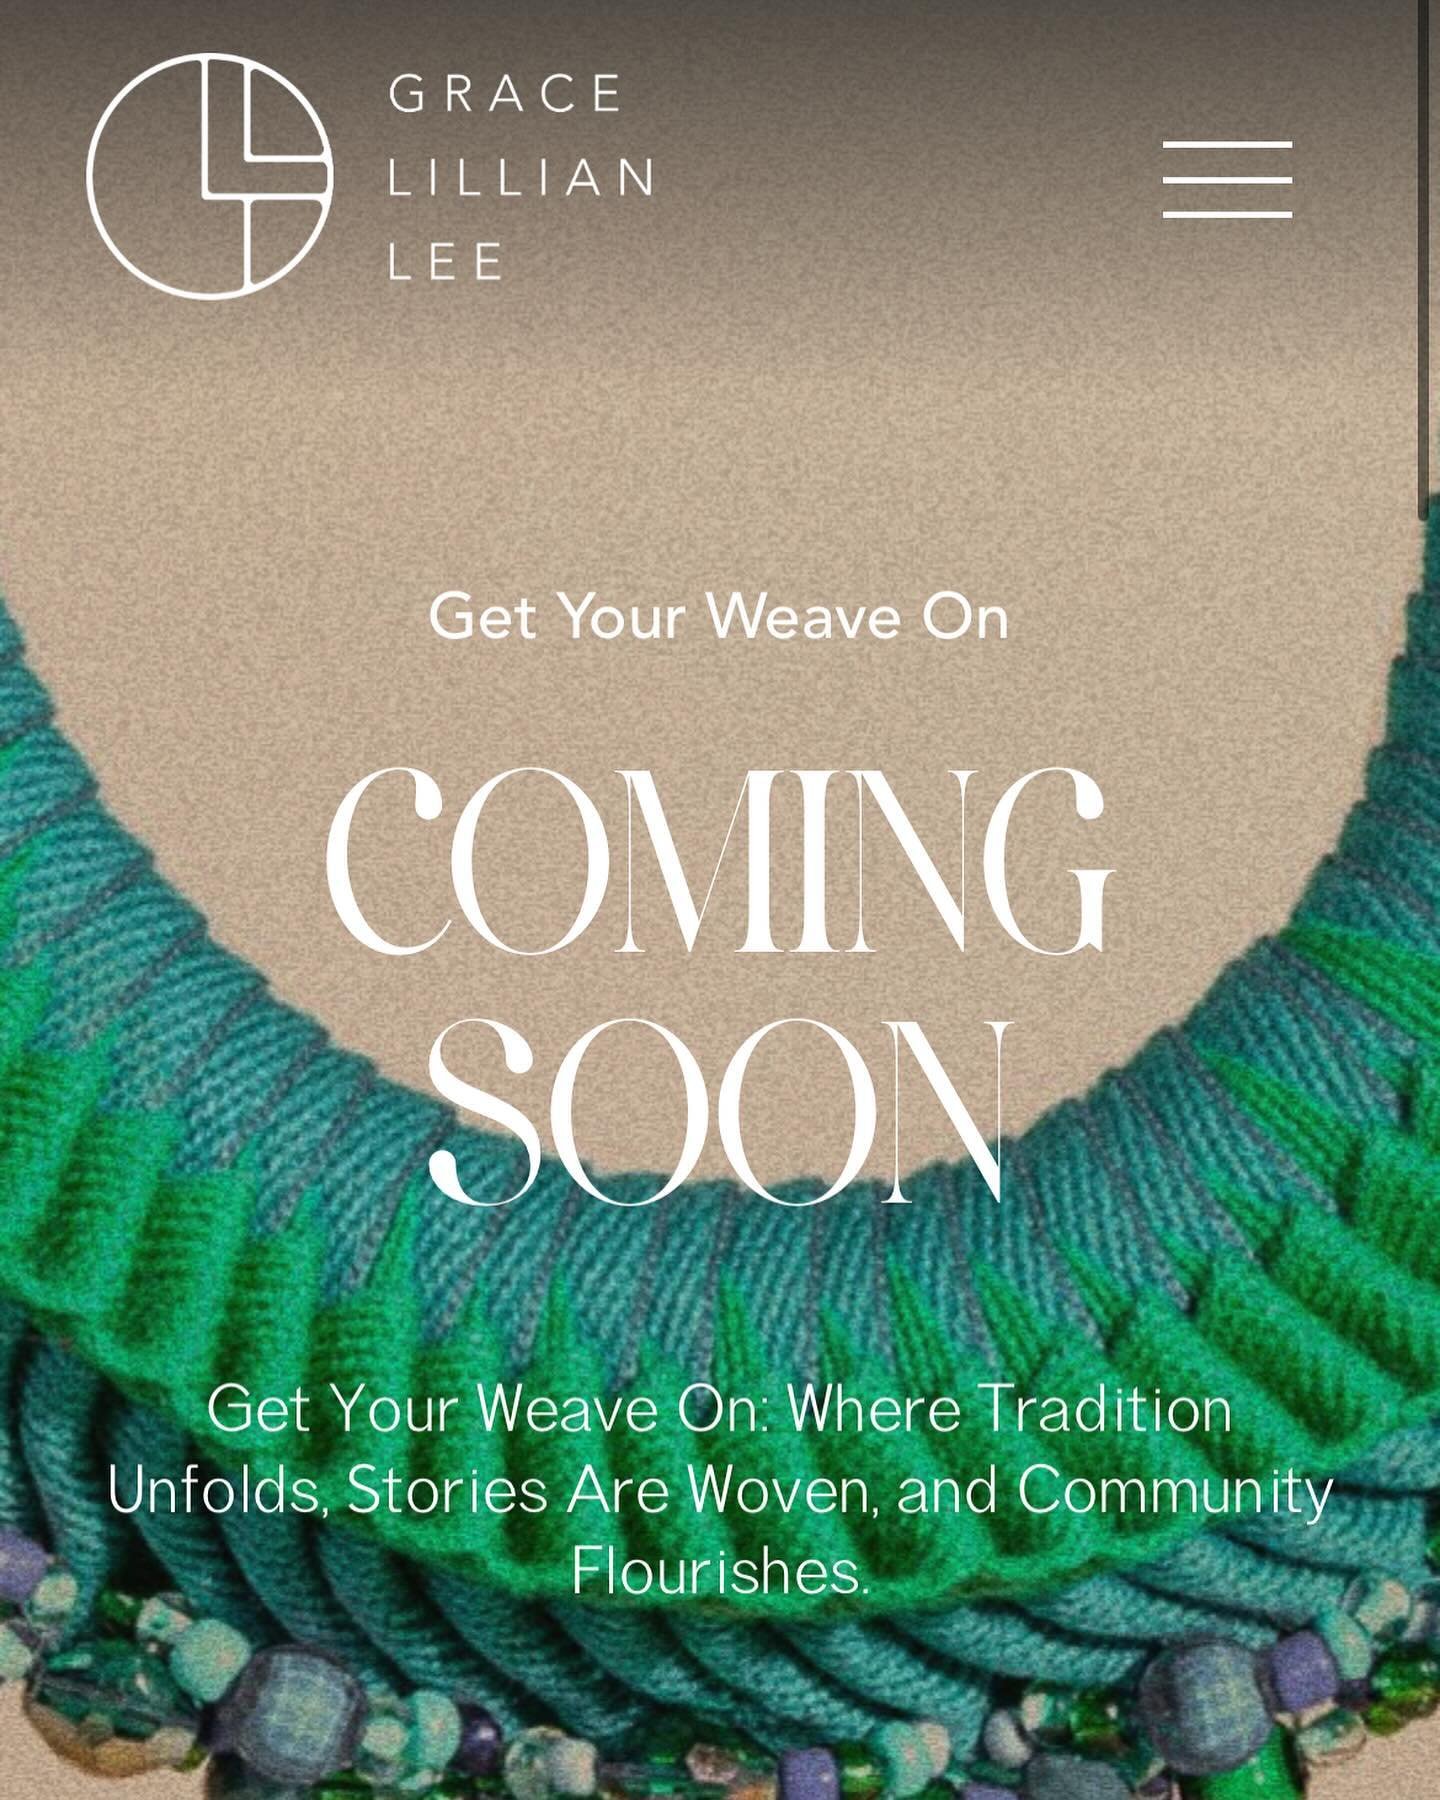 🌟 Exciting News! 🌟 ITS TIME TO - GET YOUR WEAVE ON 

I&rsquo;m thrilled to announce the launch of my first commercial collection, the Marcella collection! Inspired by my late Grandma Marcella Lillian Lee, each piece is meticulously hand-woven by me